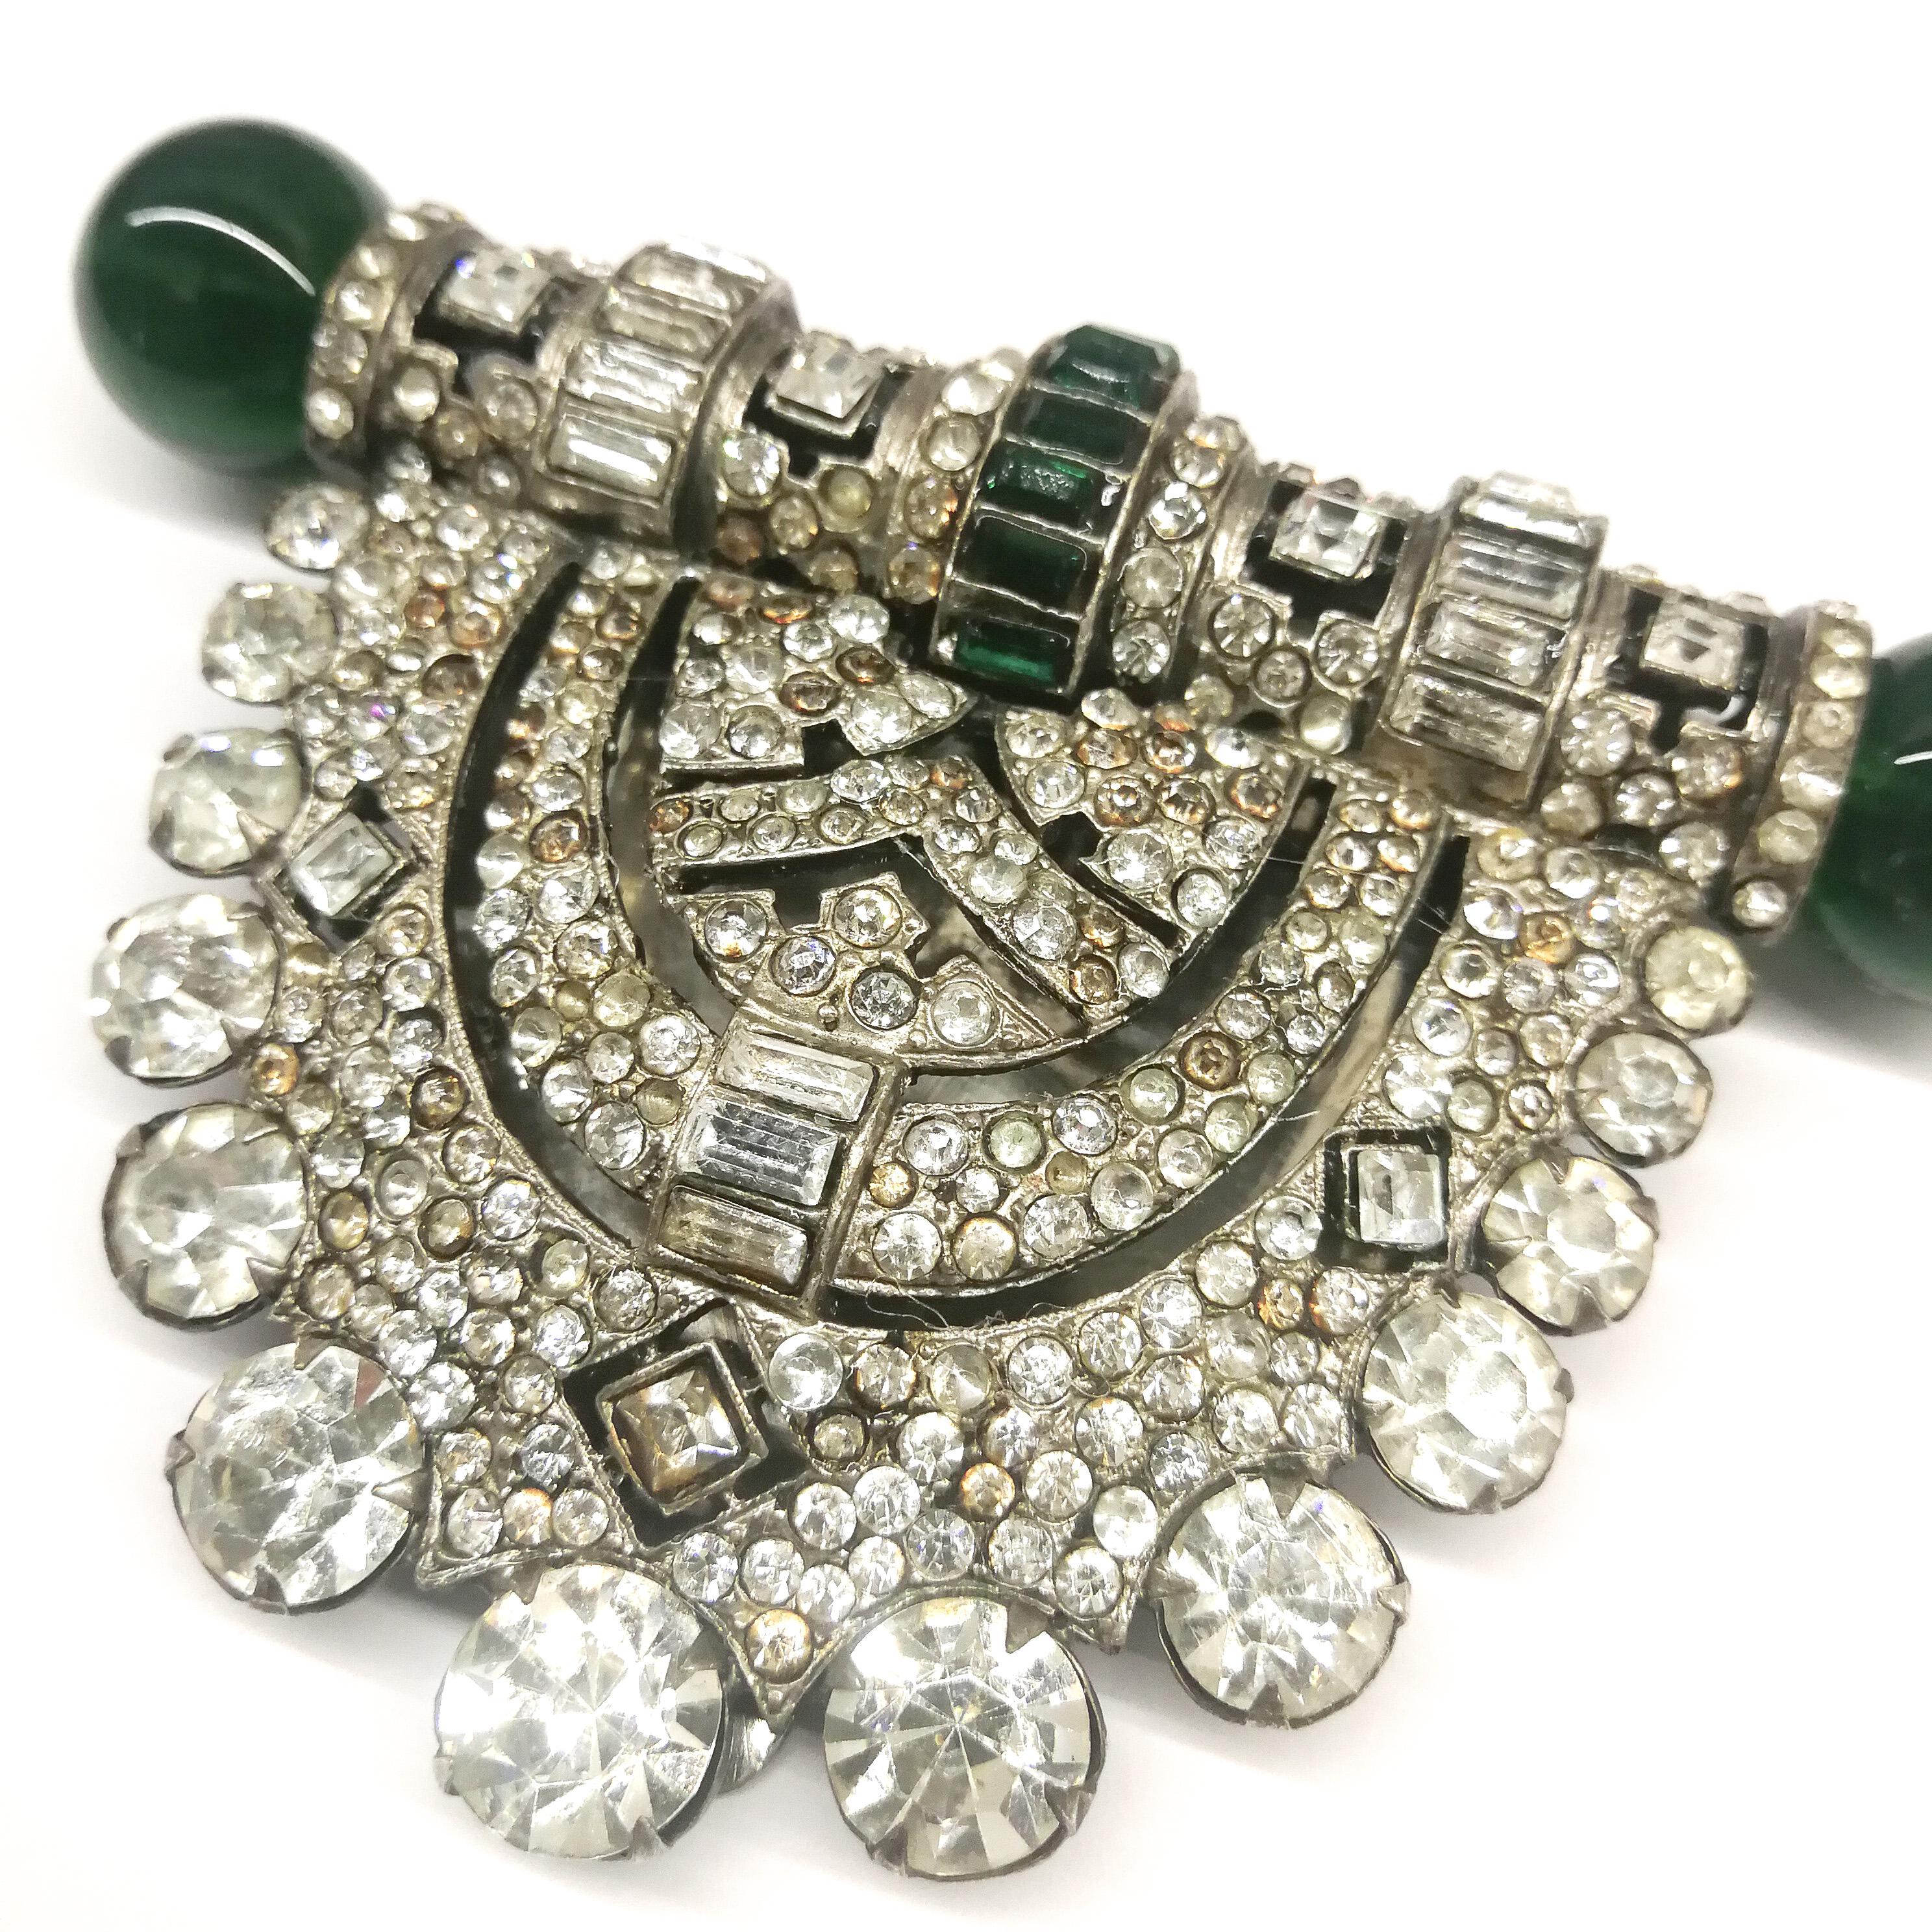 A very stylish jewel, high high Art Deco in style and make.
This is a clip fitting, bold and strong, that would clip onto a clutch bag, a lapel, or on the edging of a low cut dress, front or back. Many possibilities. Made by Renel, a well known